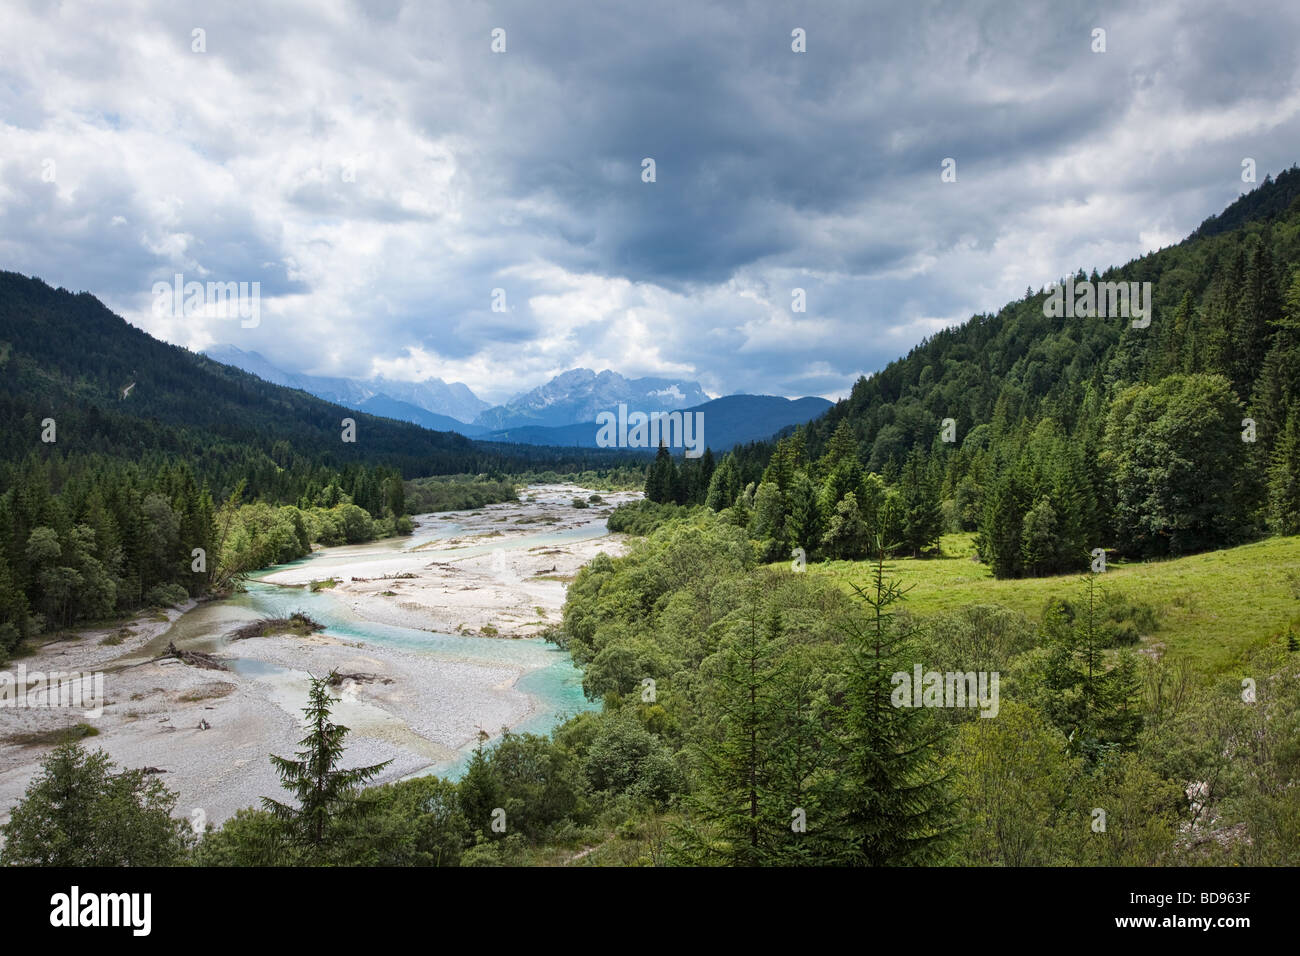 Germany landscape view along the River Isar in the Bavarian Alps, Bavaria, Germany, towards the Wetterstein mountains Stock Photo